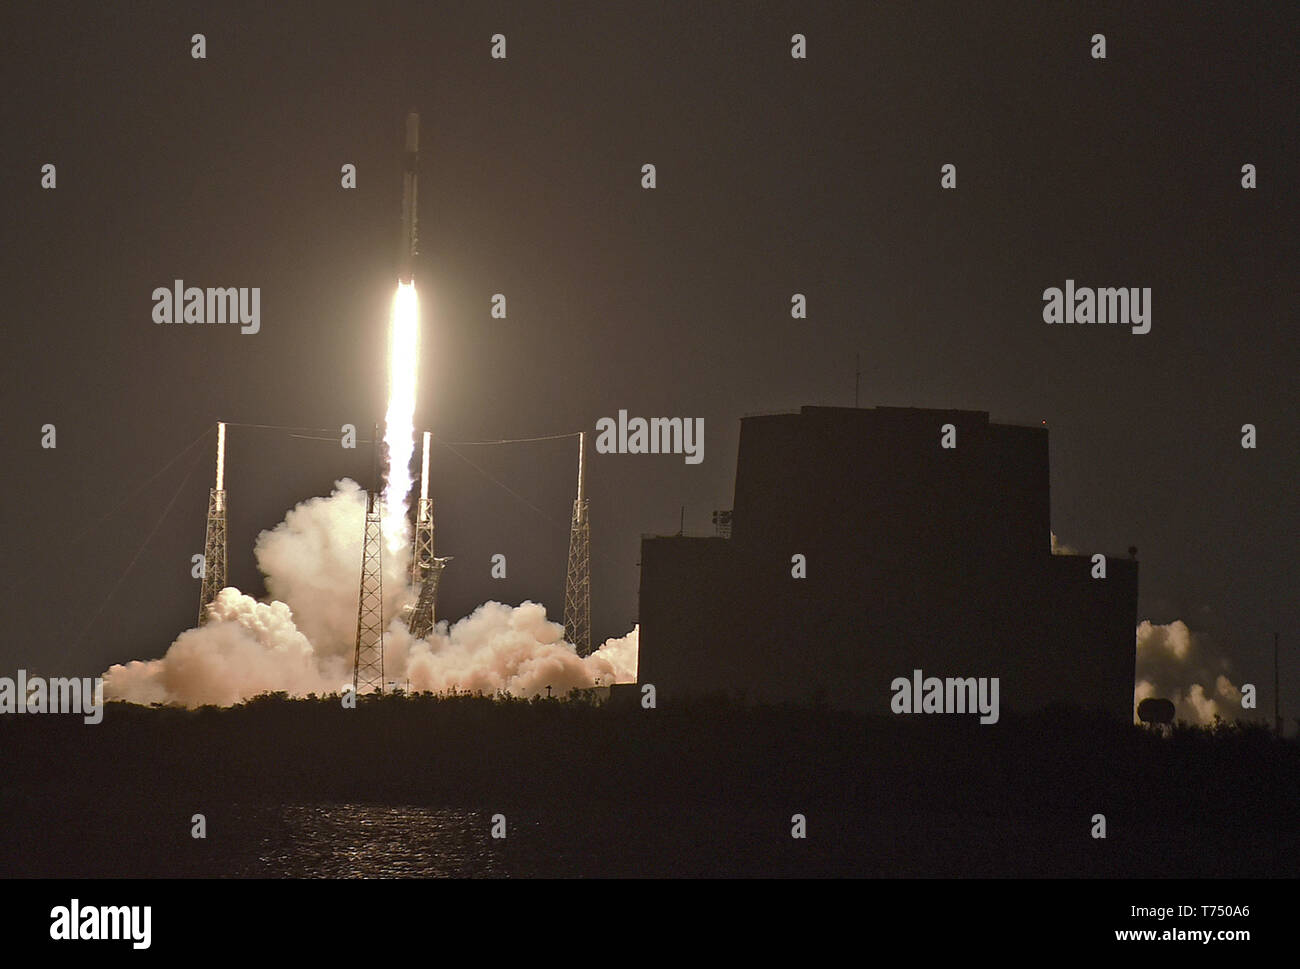 Cape Canaveral, United States. 04th May, 2019. May 4, 2019 - Cape Canaveral, Florida, United States - A SpaceX Falcon 9 rocket successfully launches the CRS-17 cargo mission from Cape Canaveral Air Force Station on May 4, 2019 in Cape Canaveral, Florida. This is the 17th resupply mission by SpaceX for NASA to the International Space Station. Credit: Paul Hennessy/Alamy Live News Stock Photo